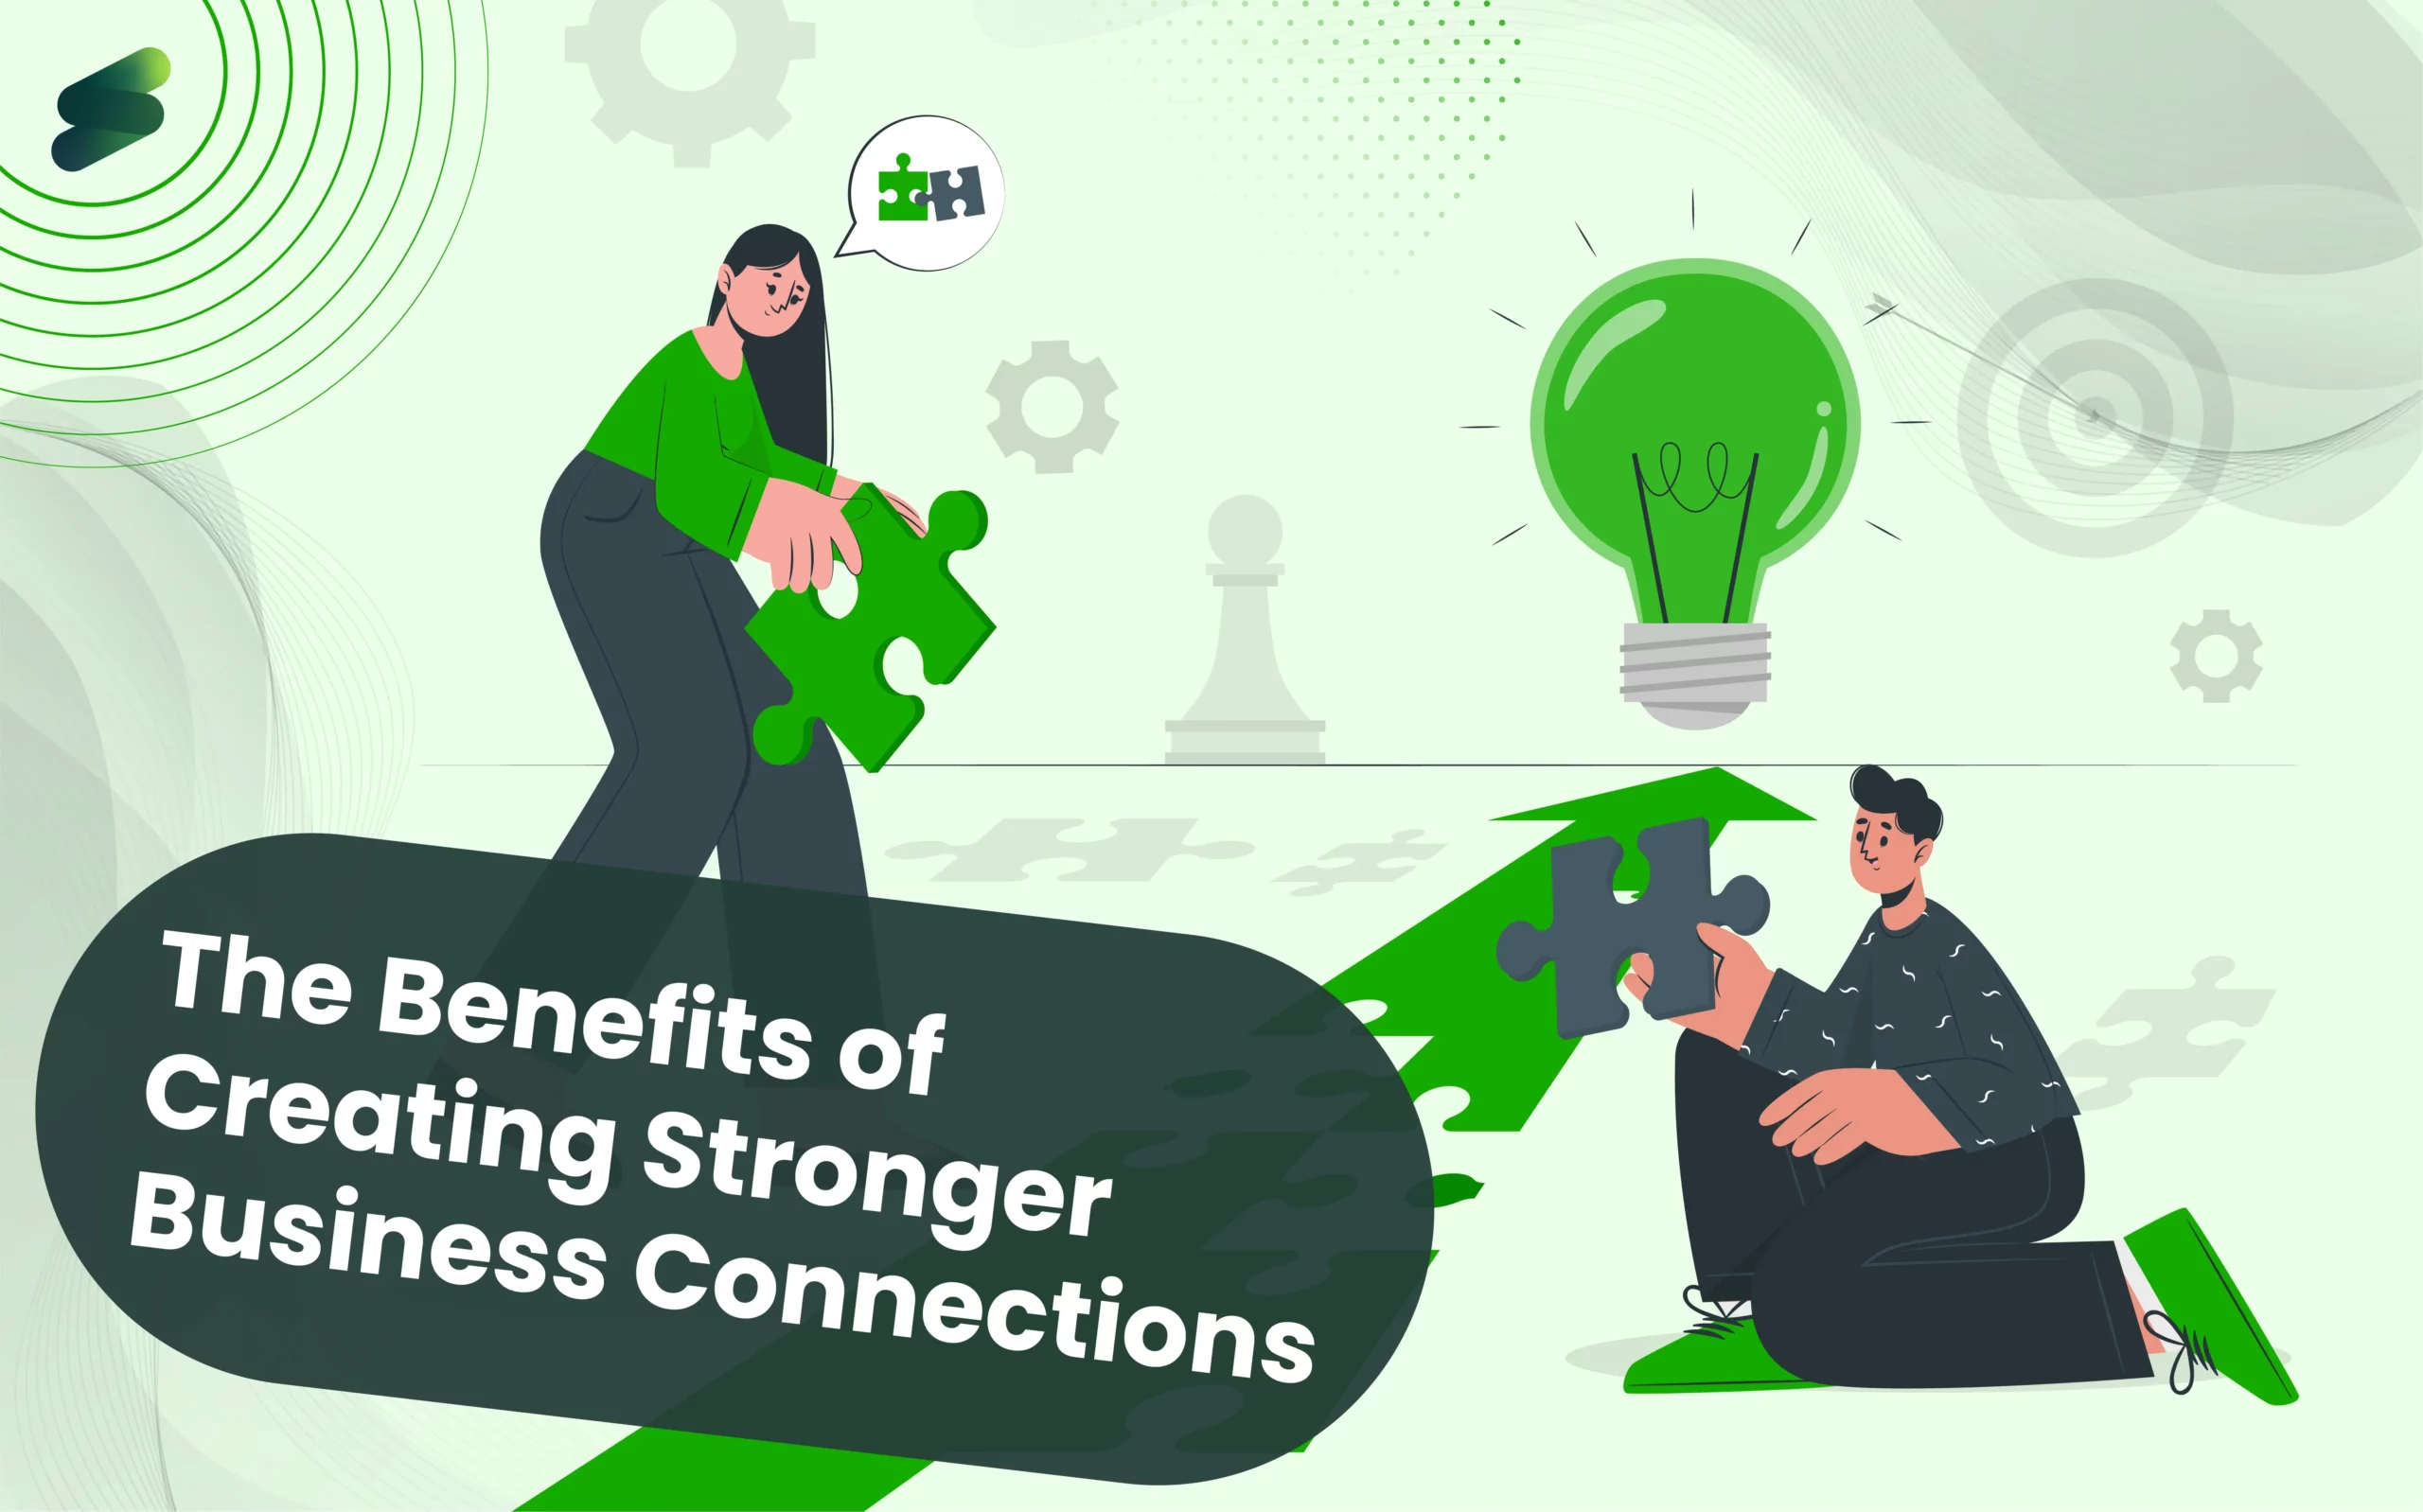 Benefits of Creating Stronger Business Connections